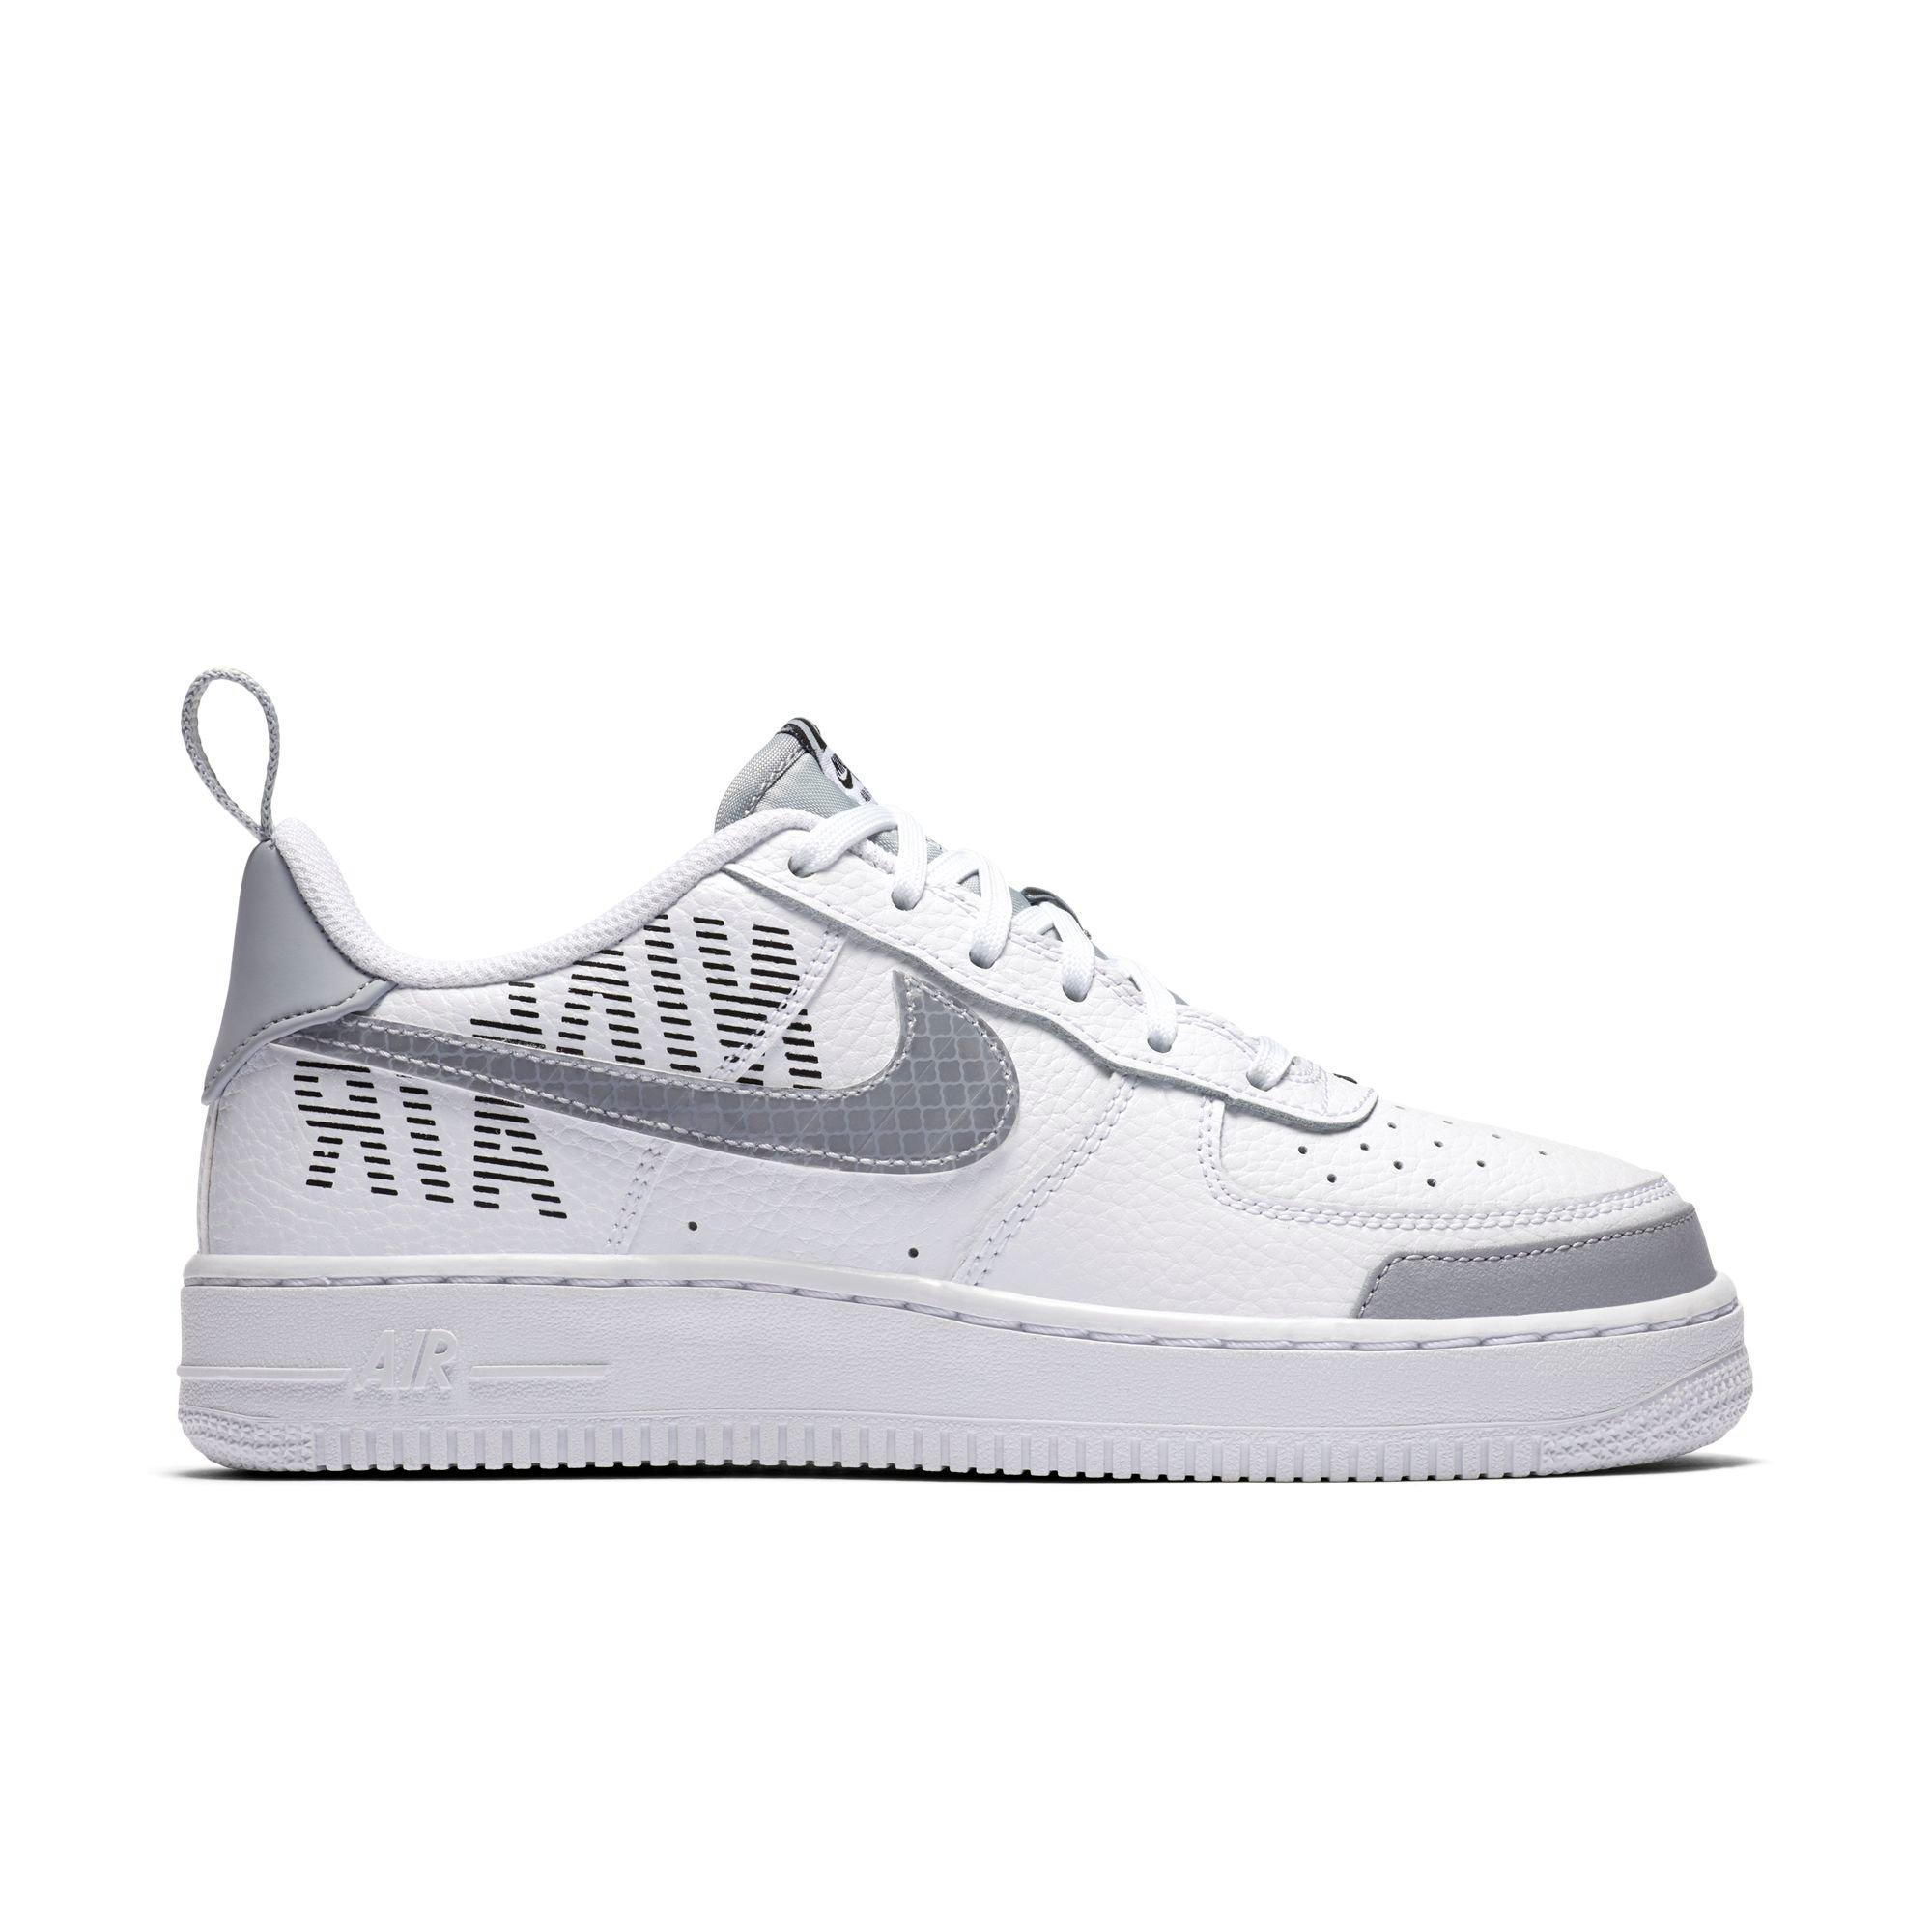 air force one lv8 grey